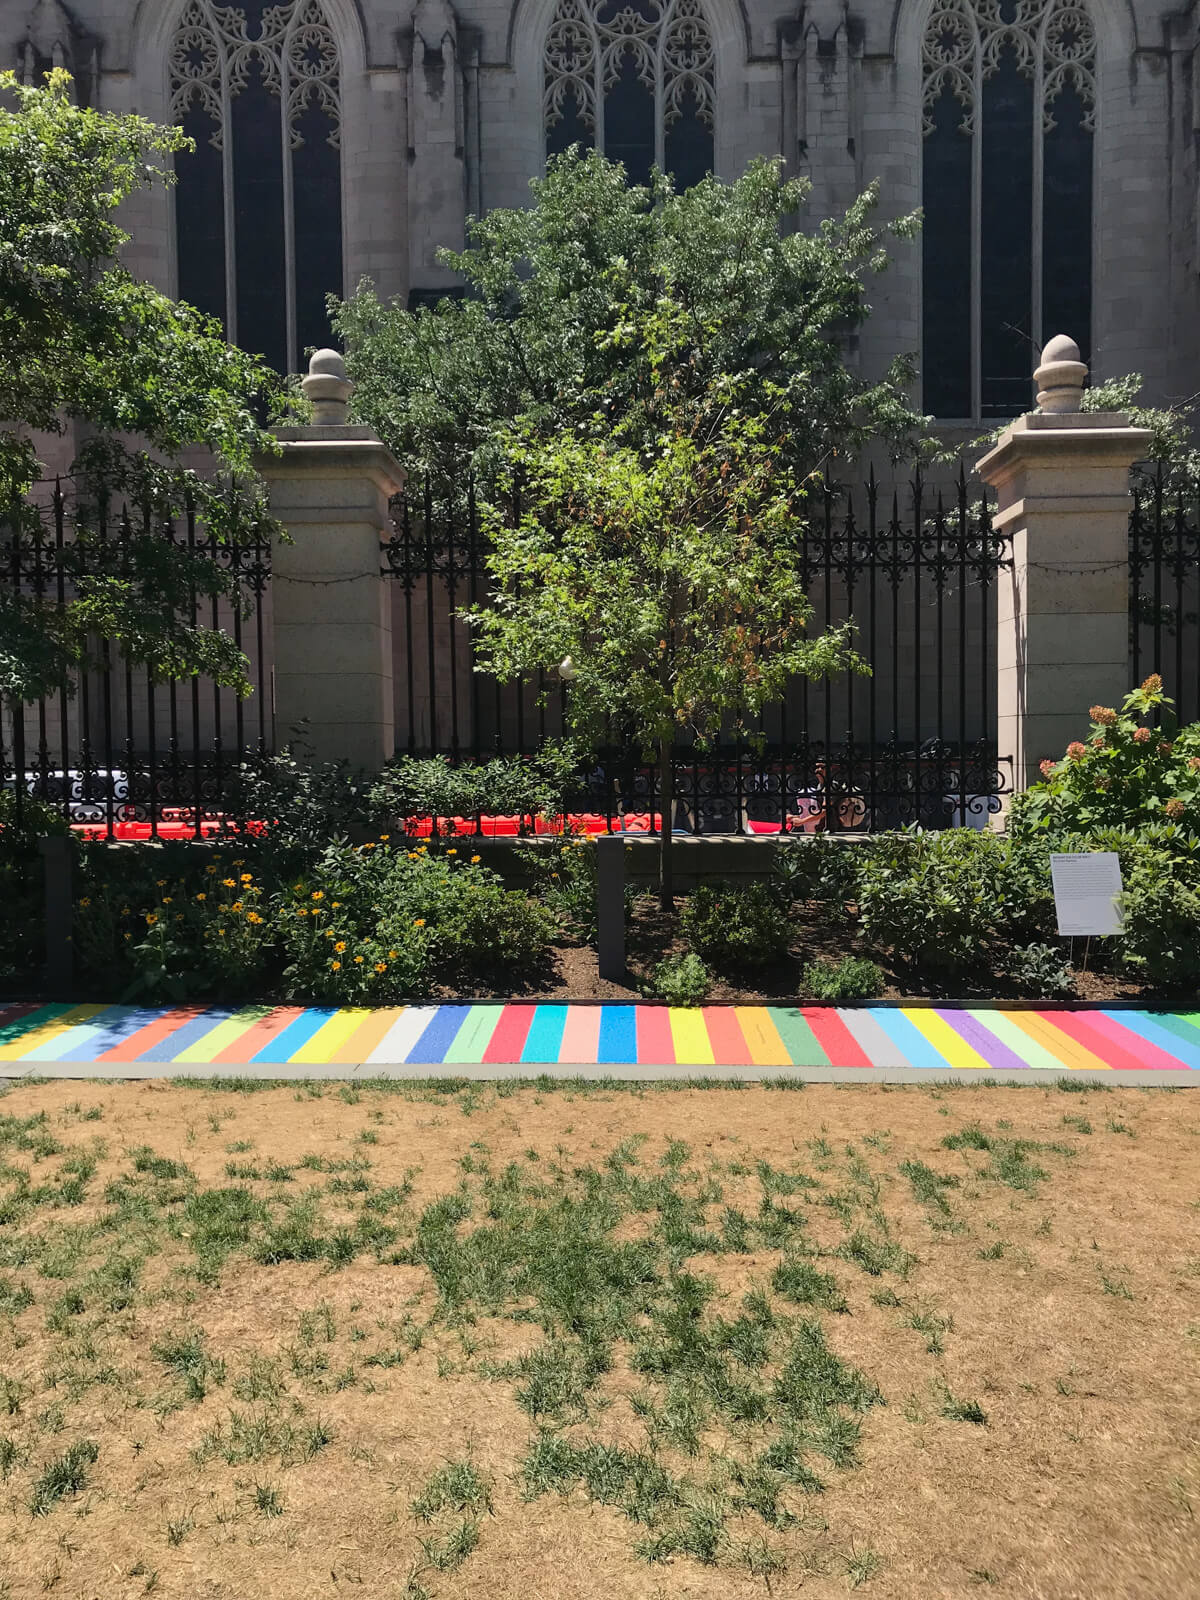 The inside of a park, walled off by pillars and black fencing. Towards the fence, from left to right, is a painted path (a walk) with different coloured stripes